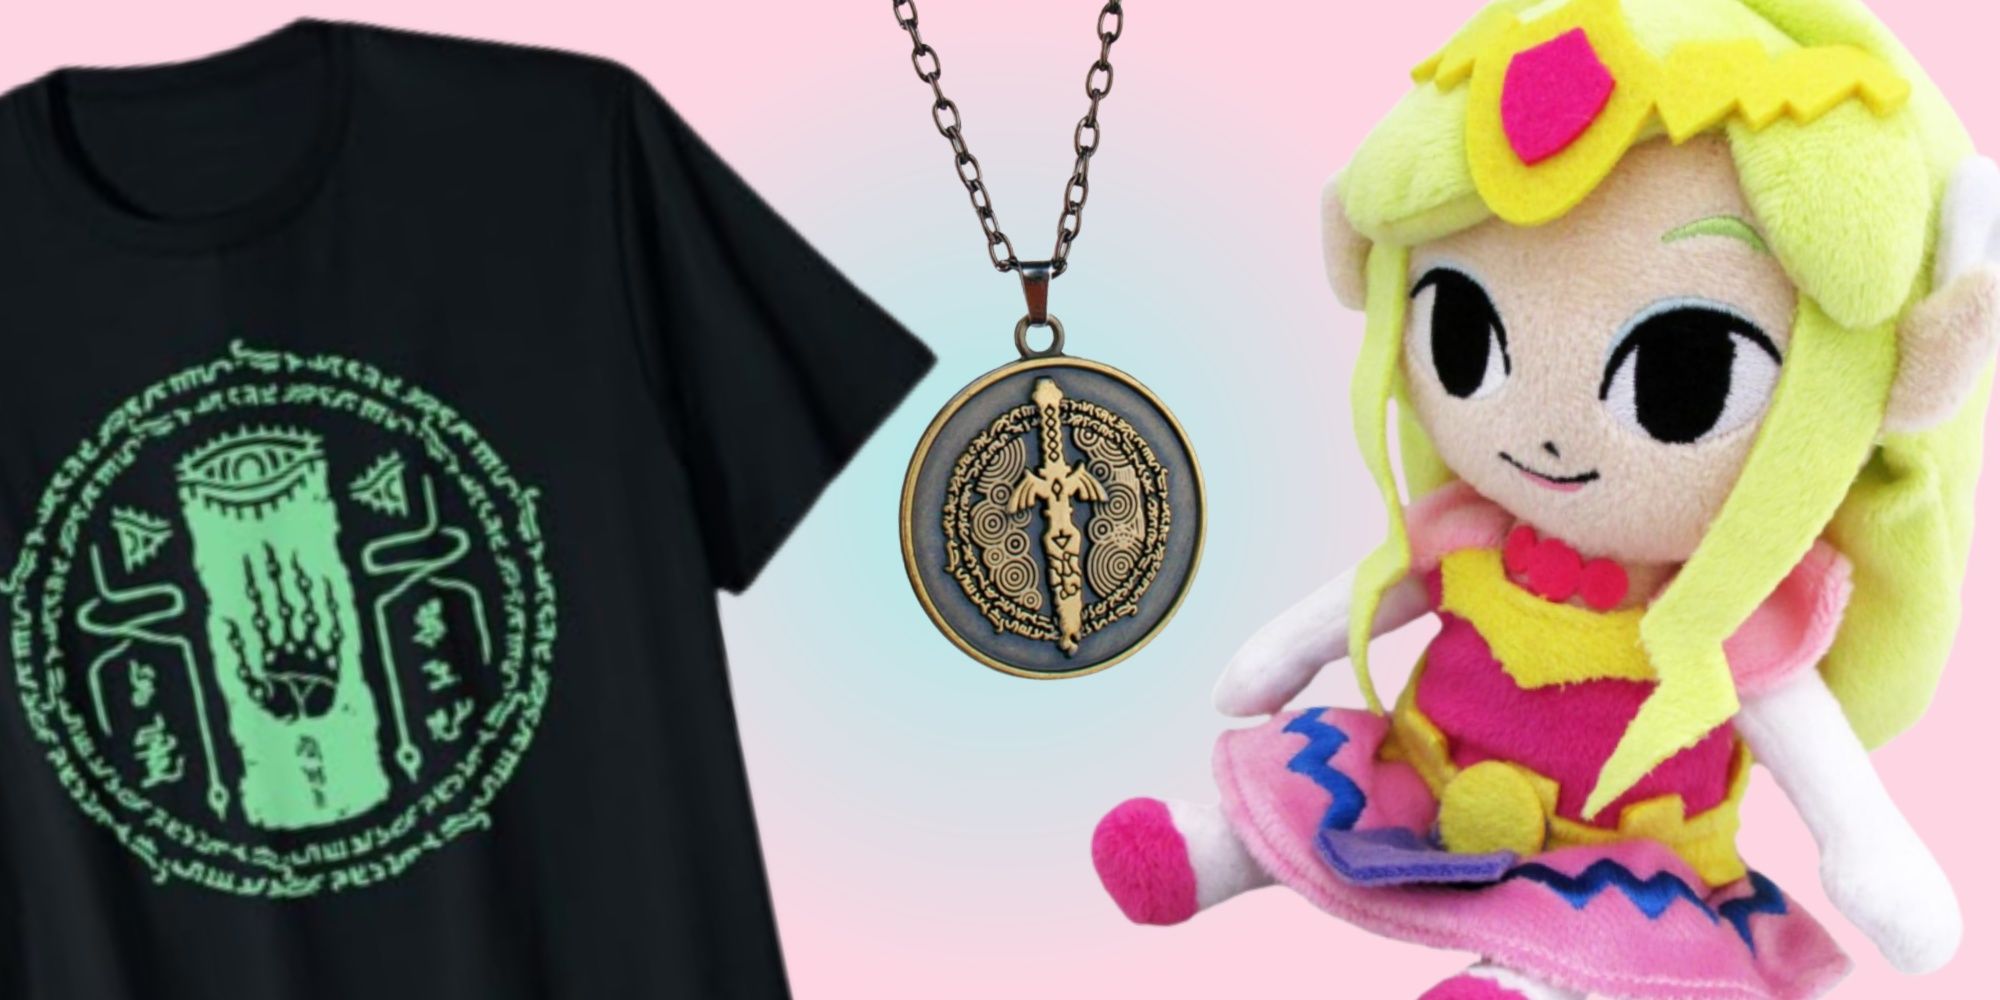 Zelda tshirt, necklace, and plush on a pink background